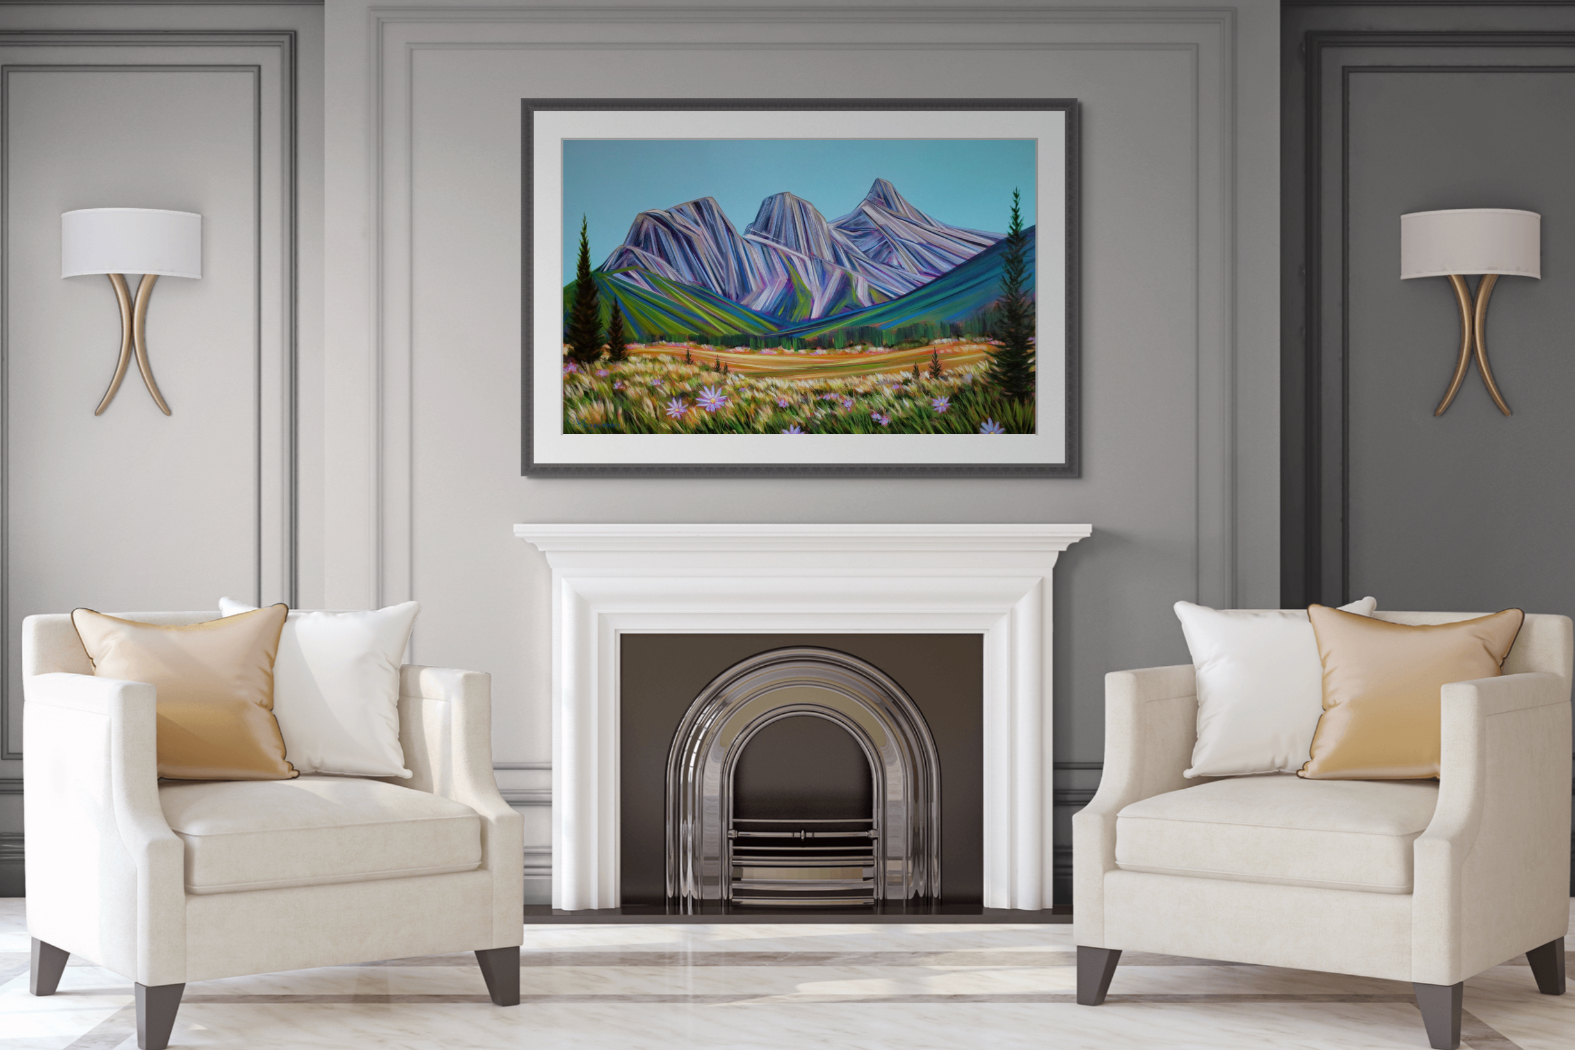 Framed painting of the Three Sisters mountains in Canmore in the summer by Kayla Eykelboom above a modern white and pewter fireplace with two beige chairs.